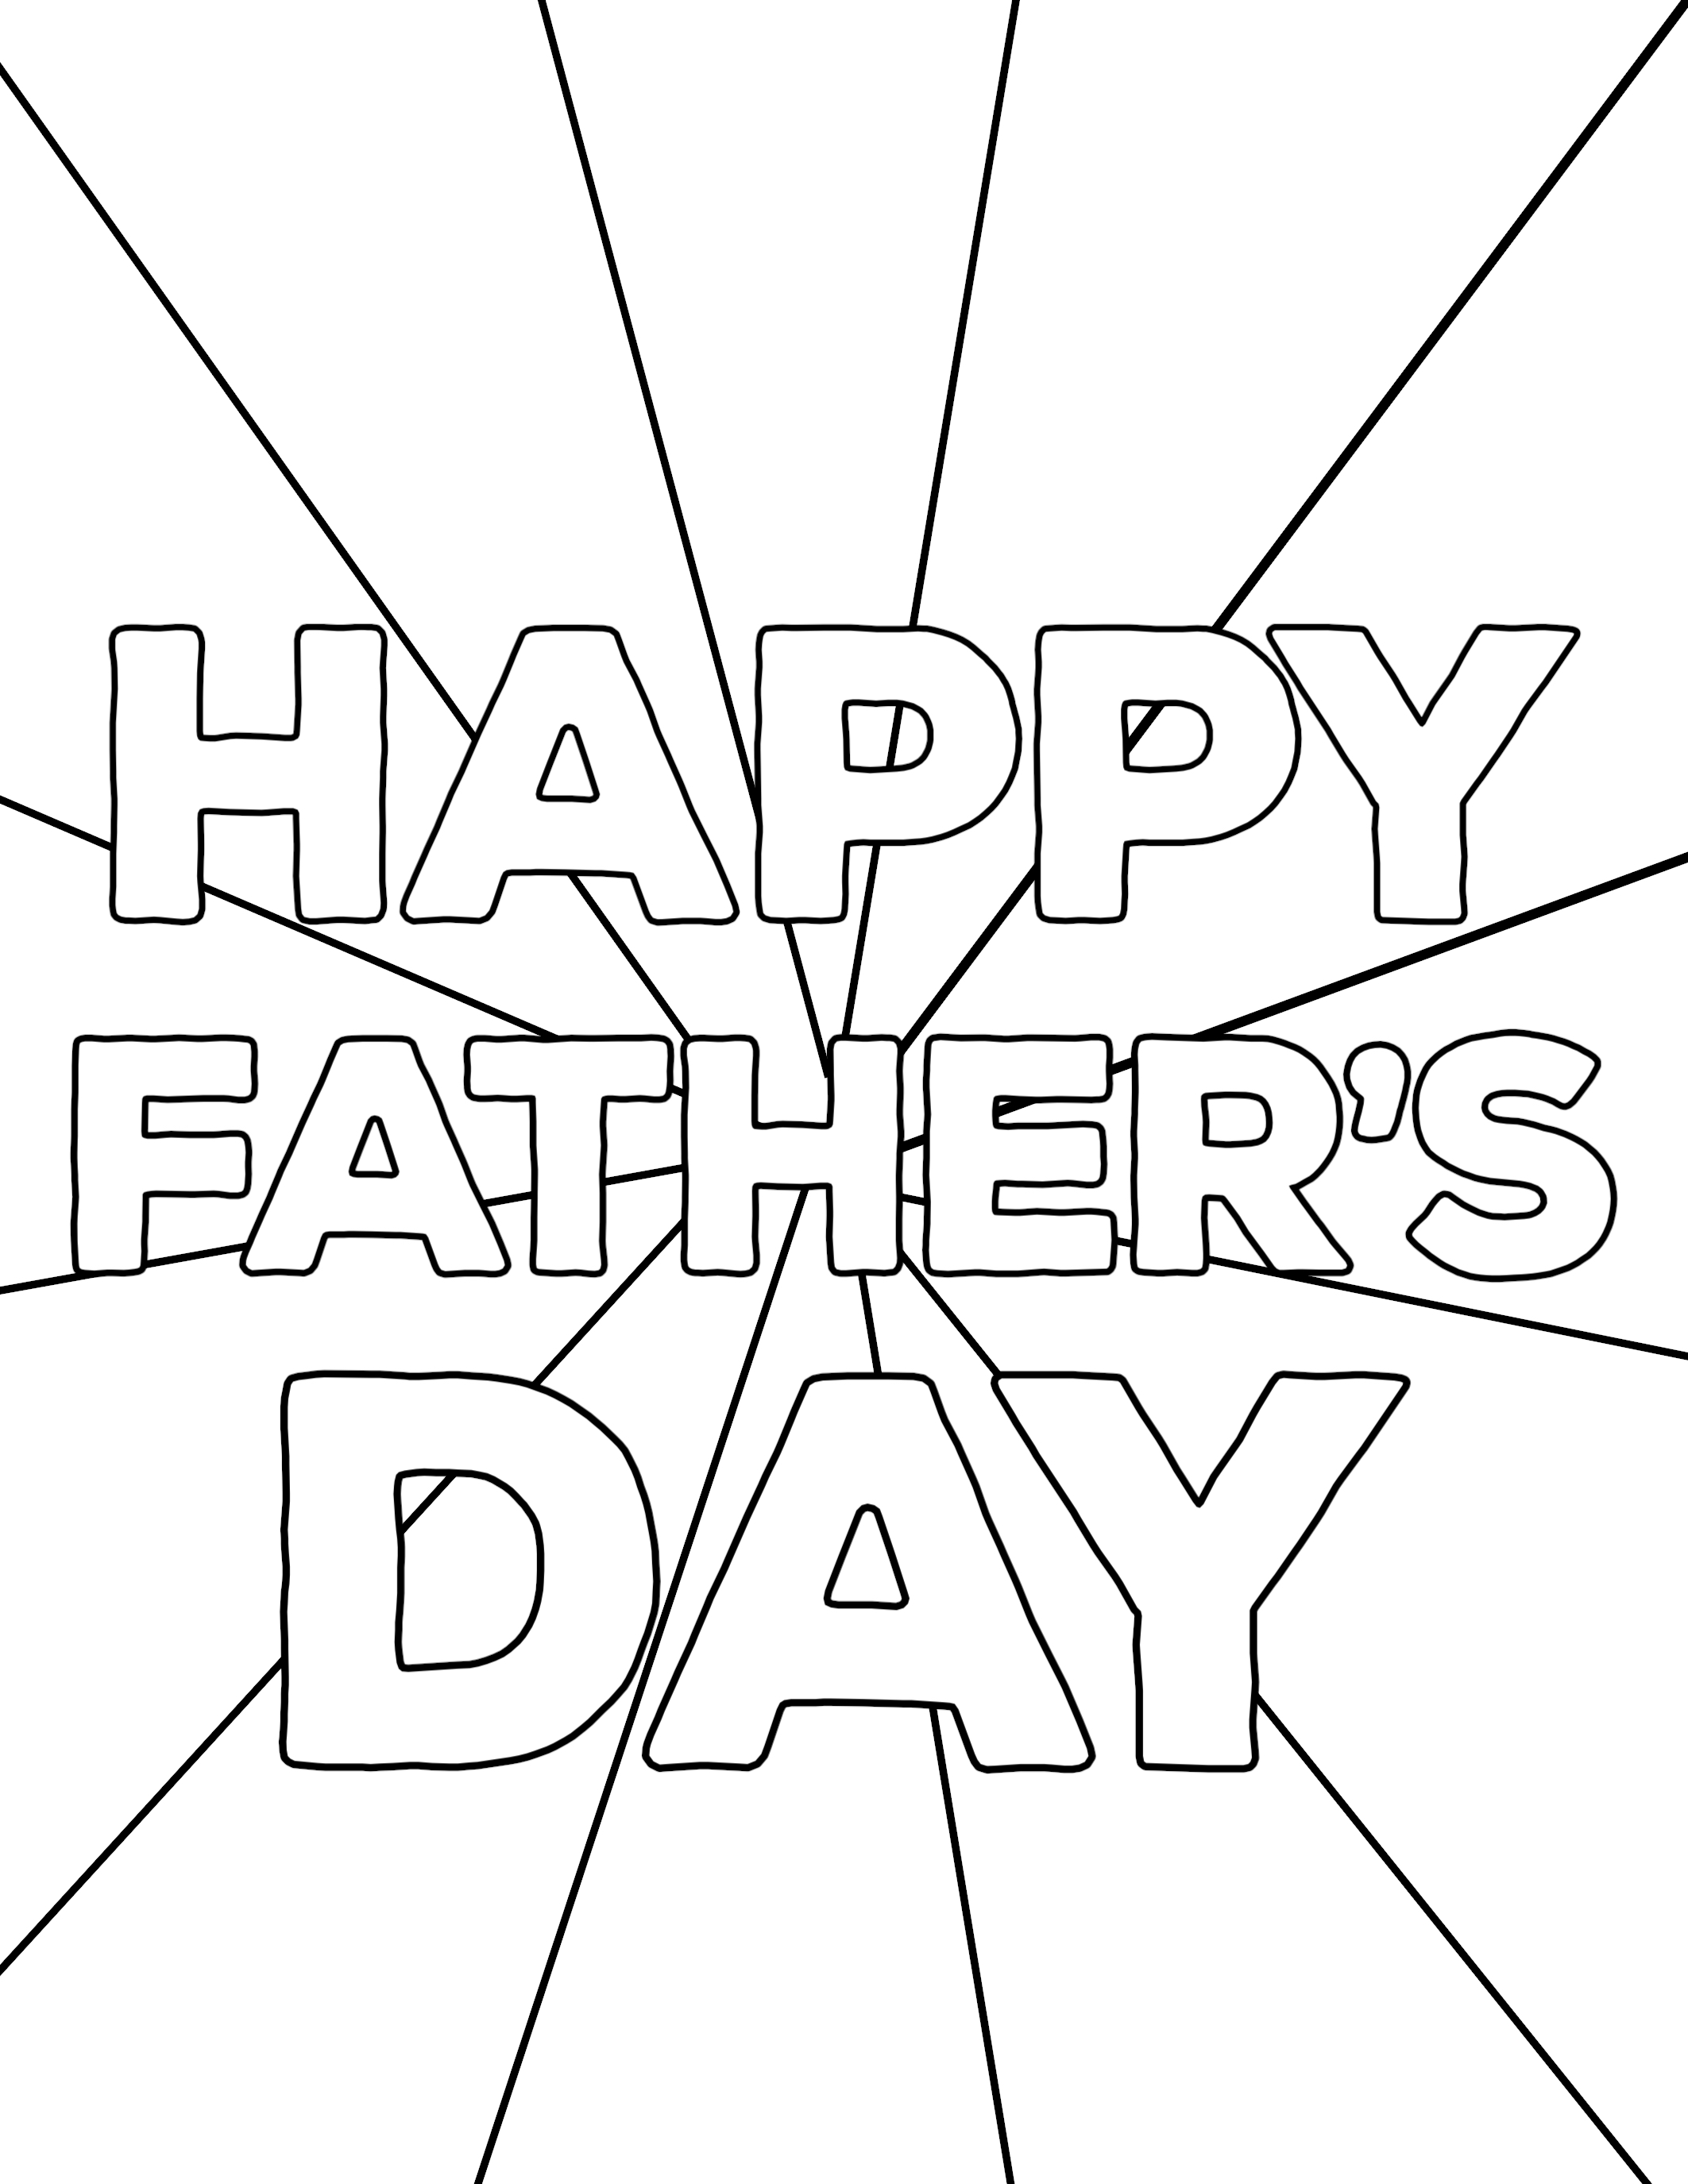 happy-fathers-day-coloring-page-printable